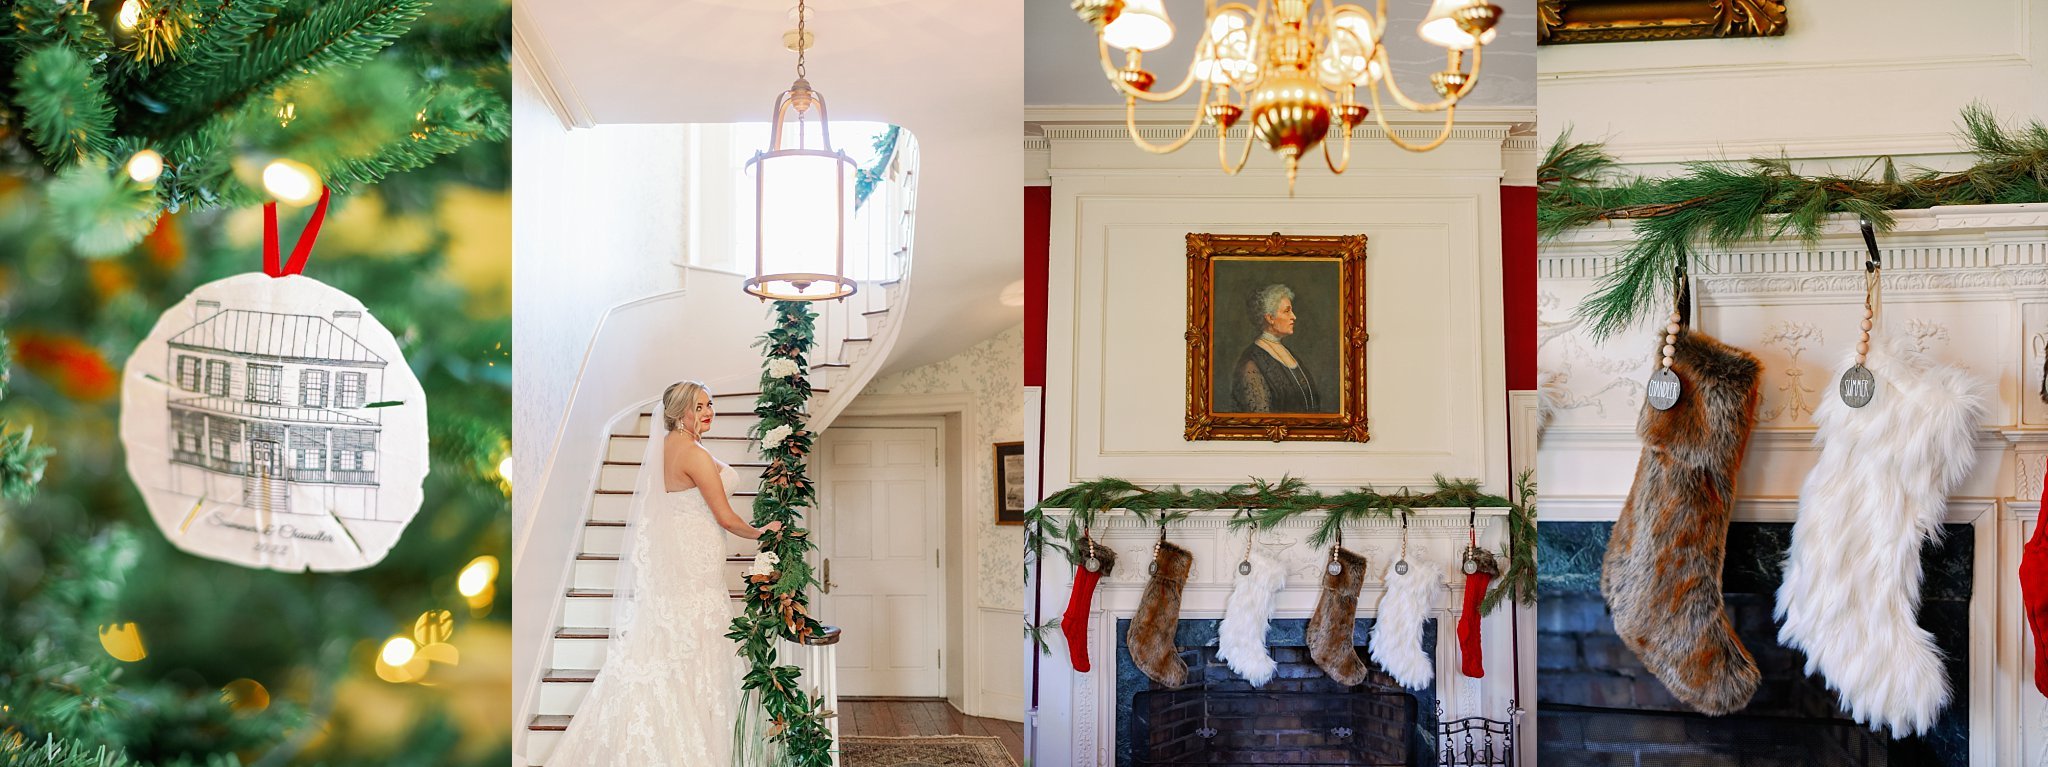 Charleston Christmas wedding inspiration at a historic wedding venue in Beaufort South Carolina. Photographed by South Carolina wedding photographer with a classic style.